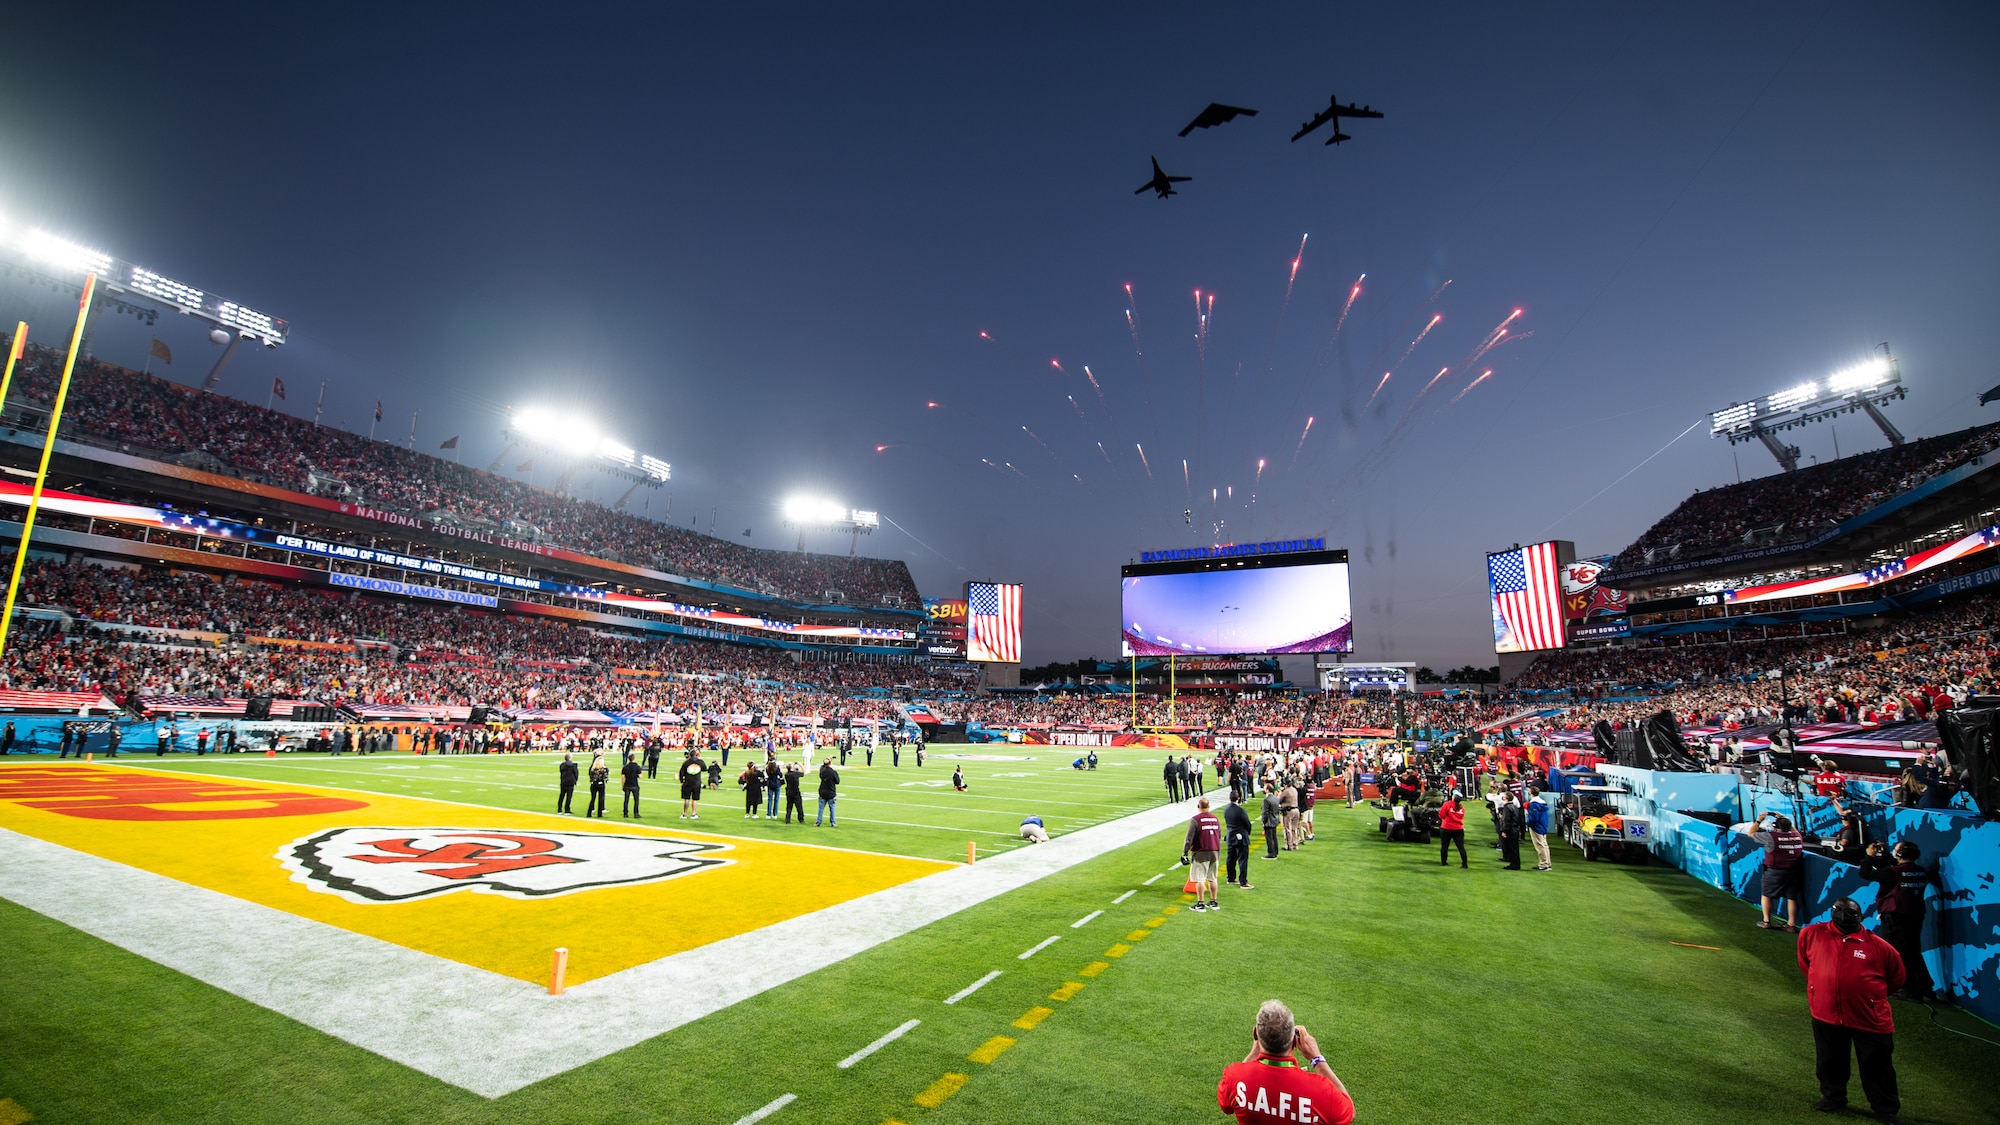 Air Force Global Strike Command bombers perform the Super Bowl LV flyover at Raymond James Stadium in Tampa, Fla., Jan. 7, 2021. The trifecta was the first of its kind as it included a B-1B Lancer from Ellsworth Air Force Base, S.D., a B-2 Spirit from Whiteman AFB, Mo., and a B-52H Stratofortress from Minot AFB, N.D. (U.S. Air Force photo by Airman 1st Class Jacob B. Wrightsman)